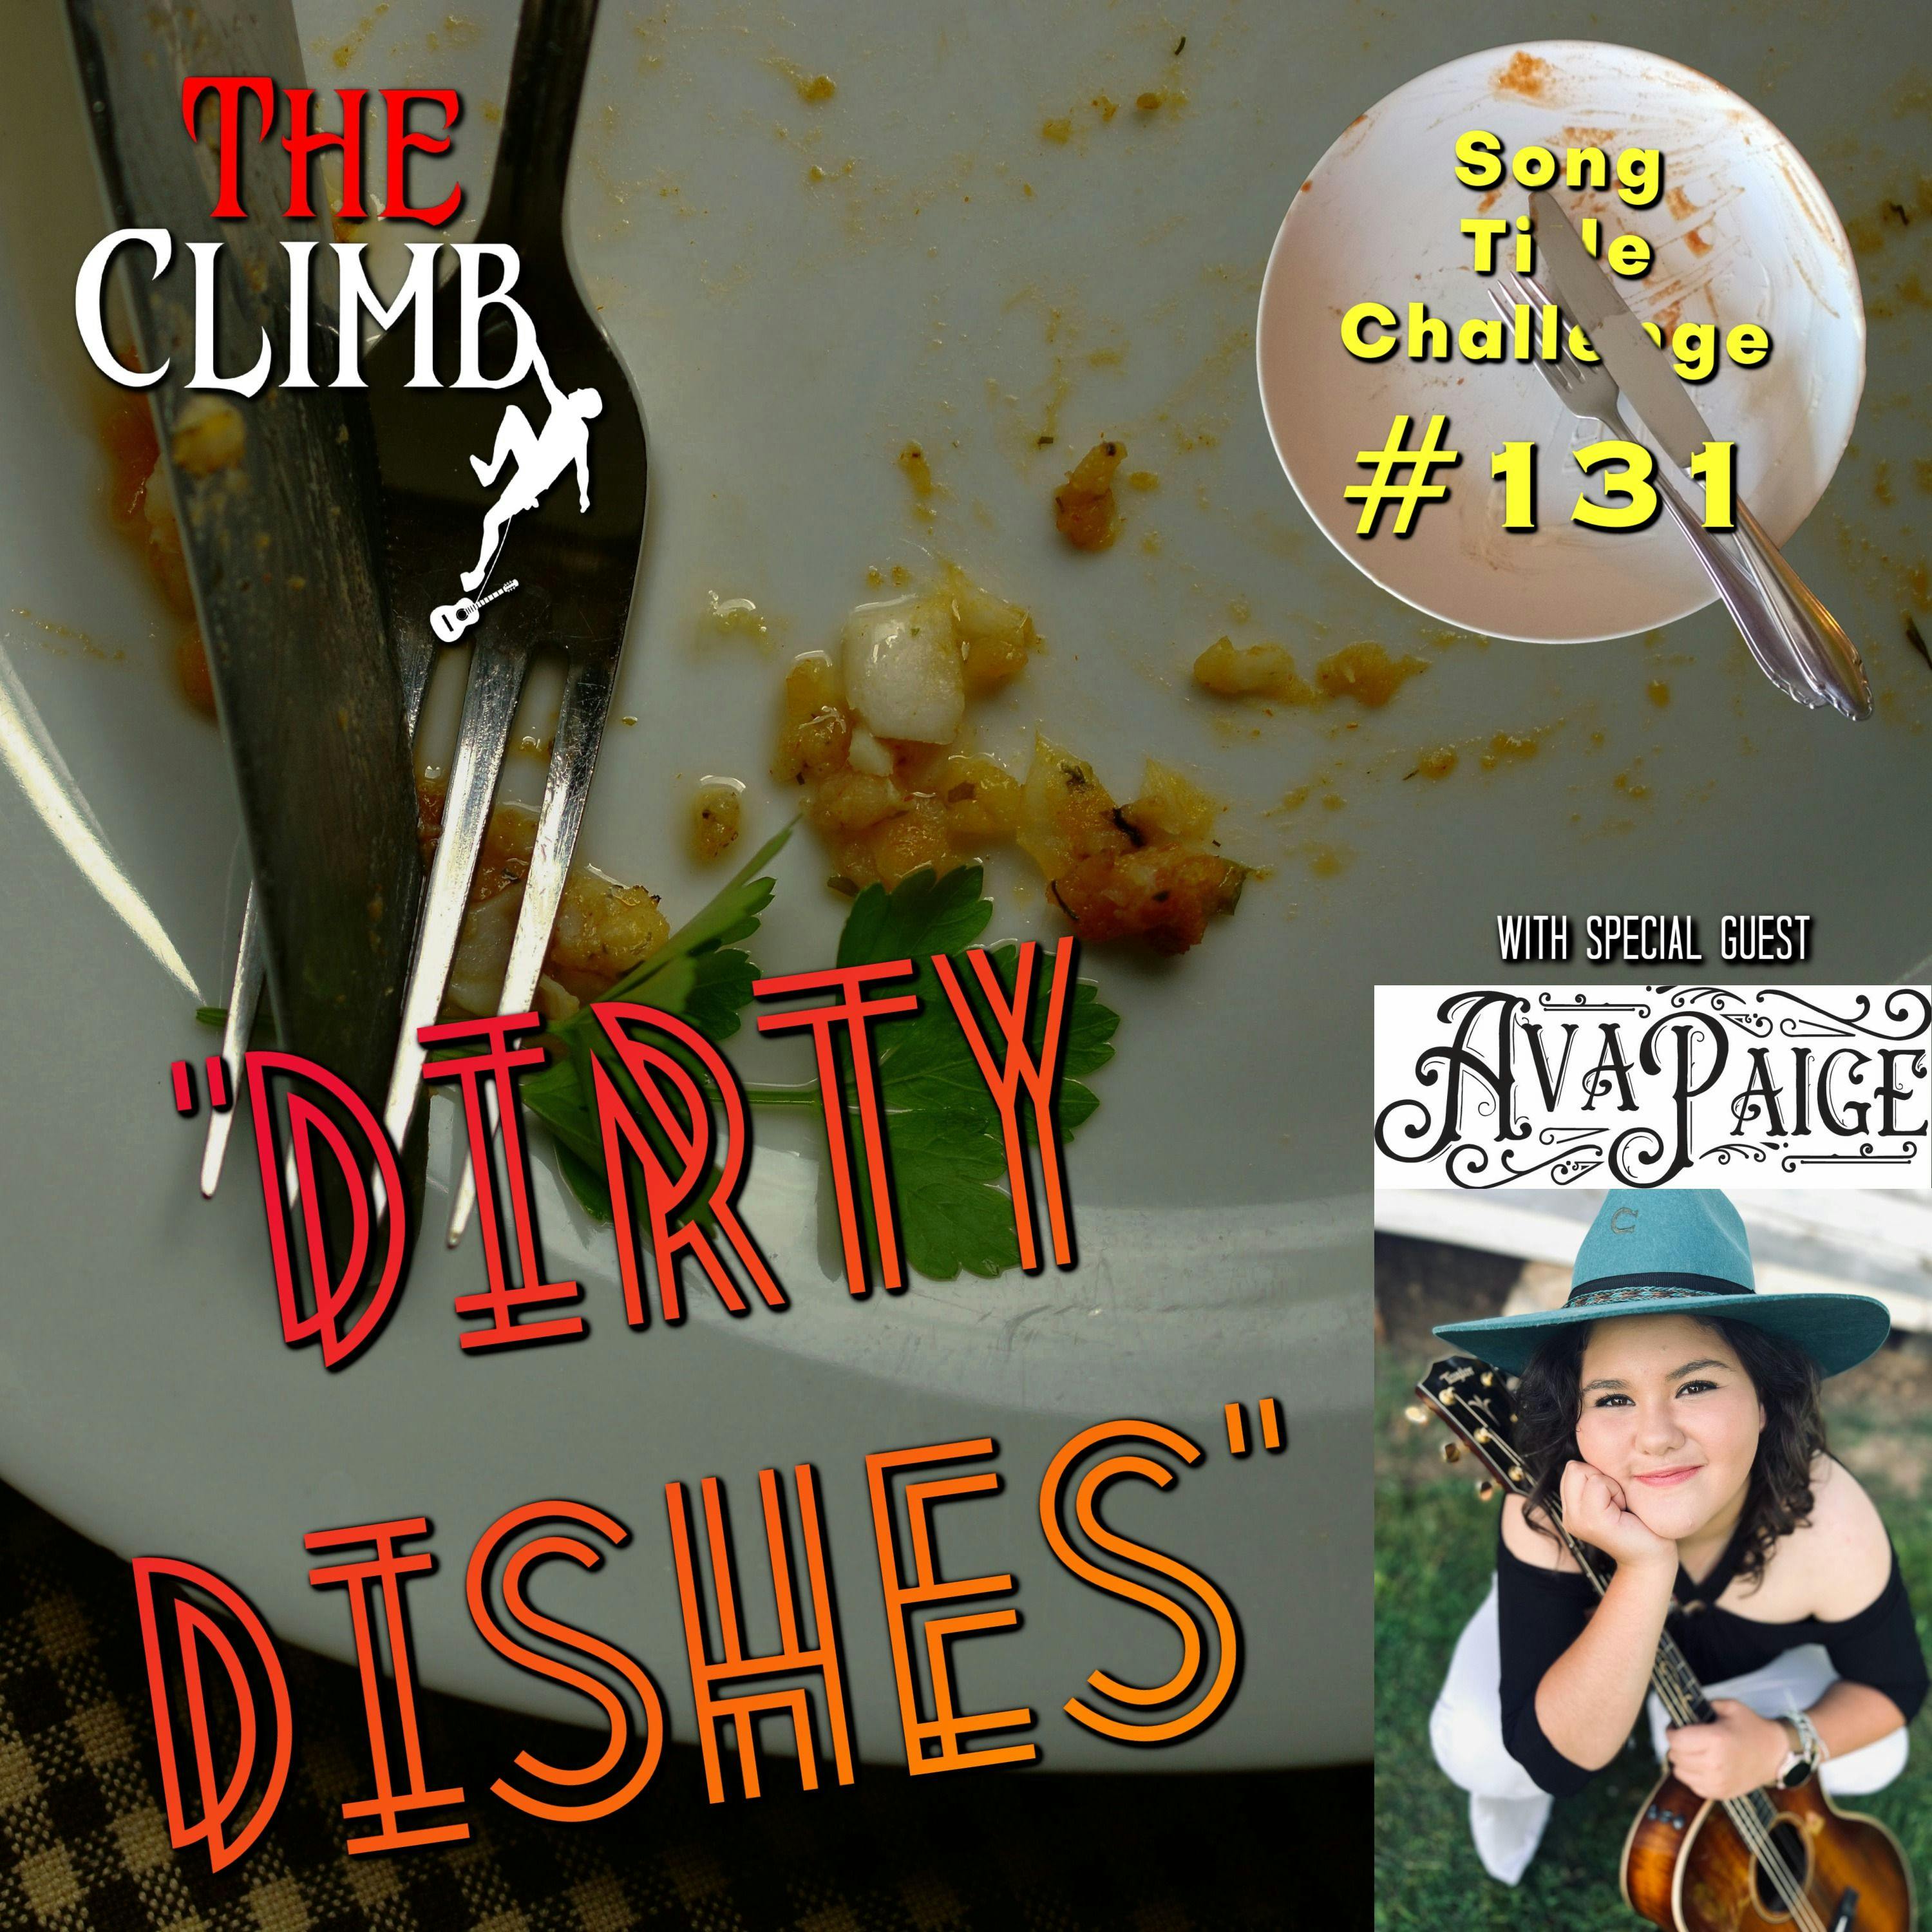 Song Title Challenge #131: ”Dirty Dishes” w/ Ava Paige